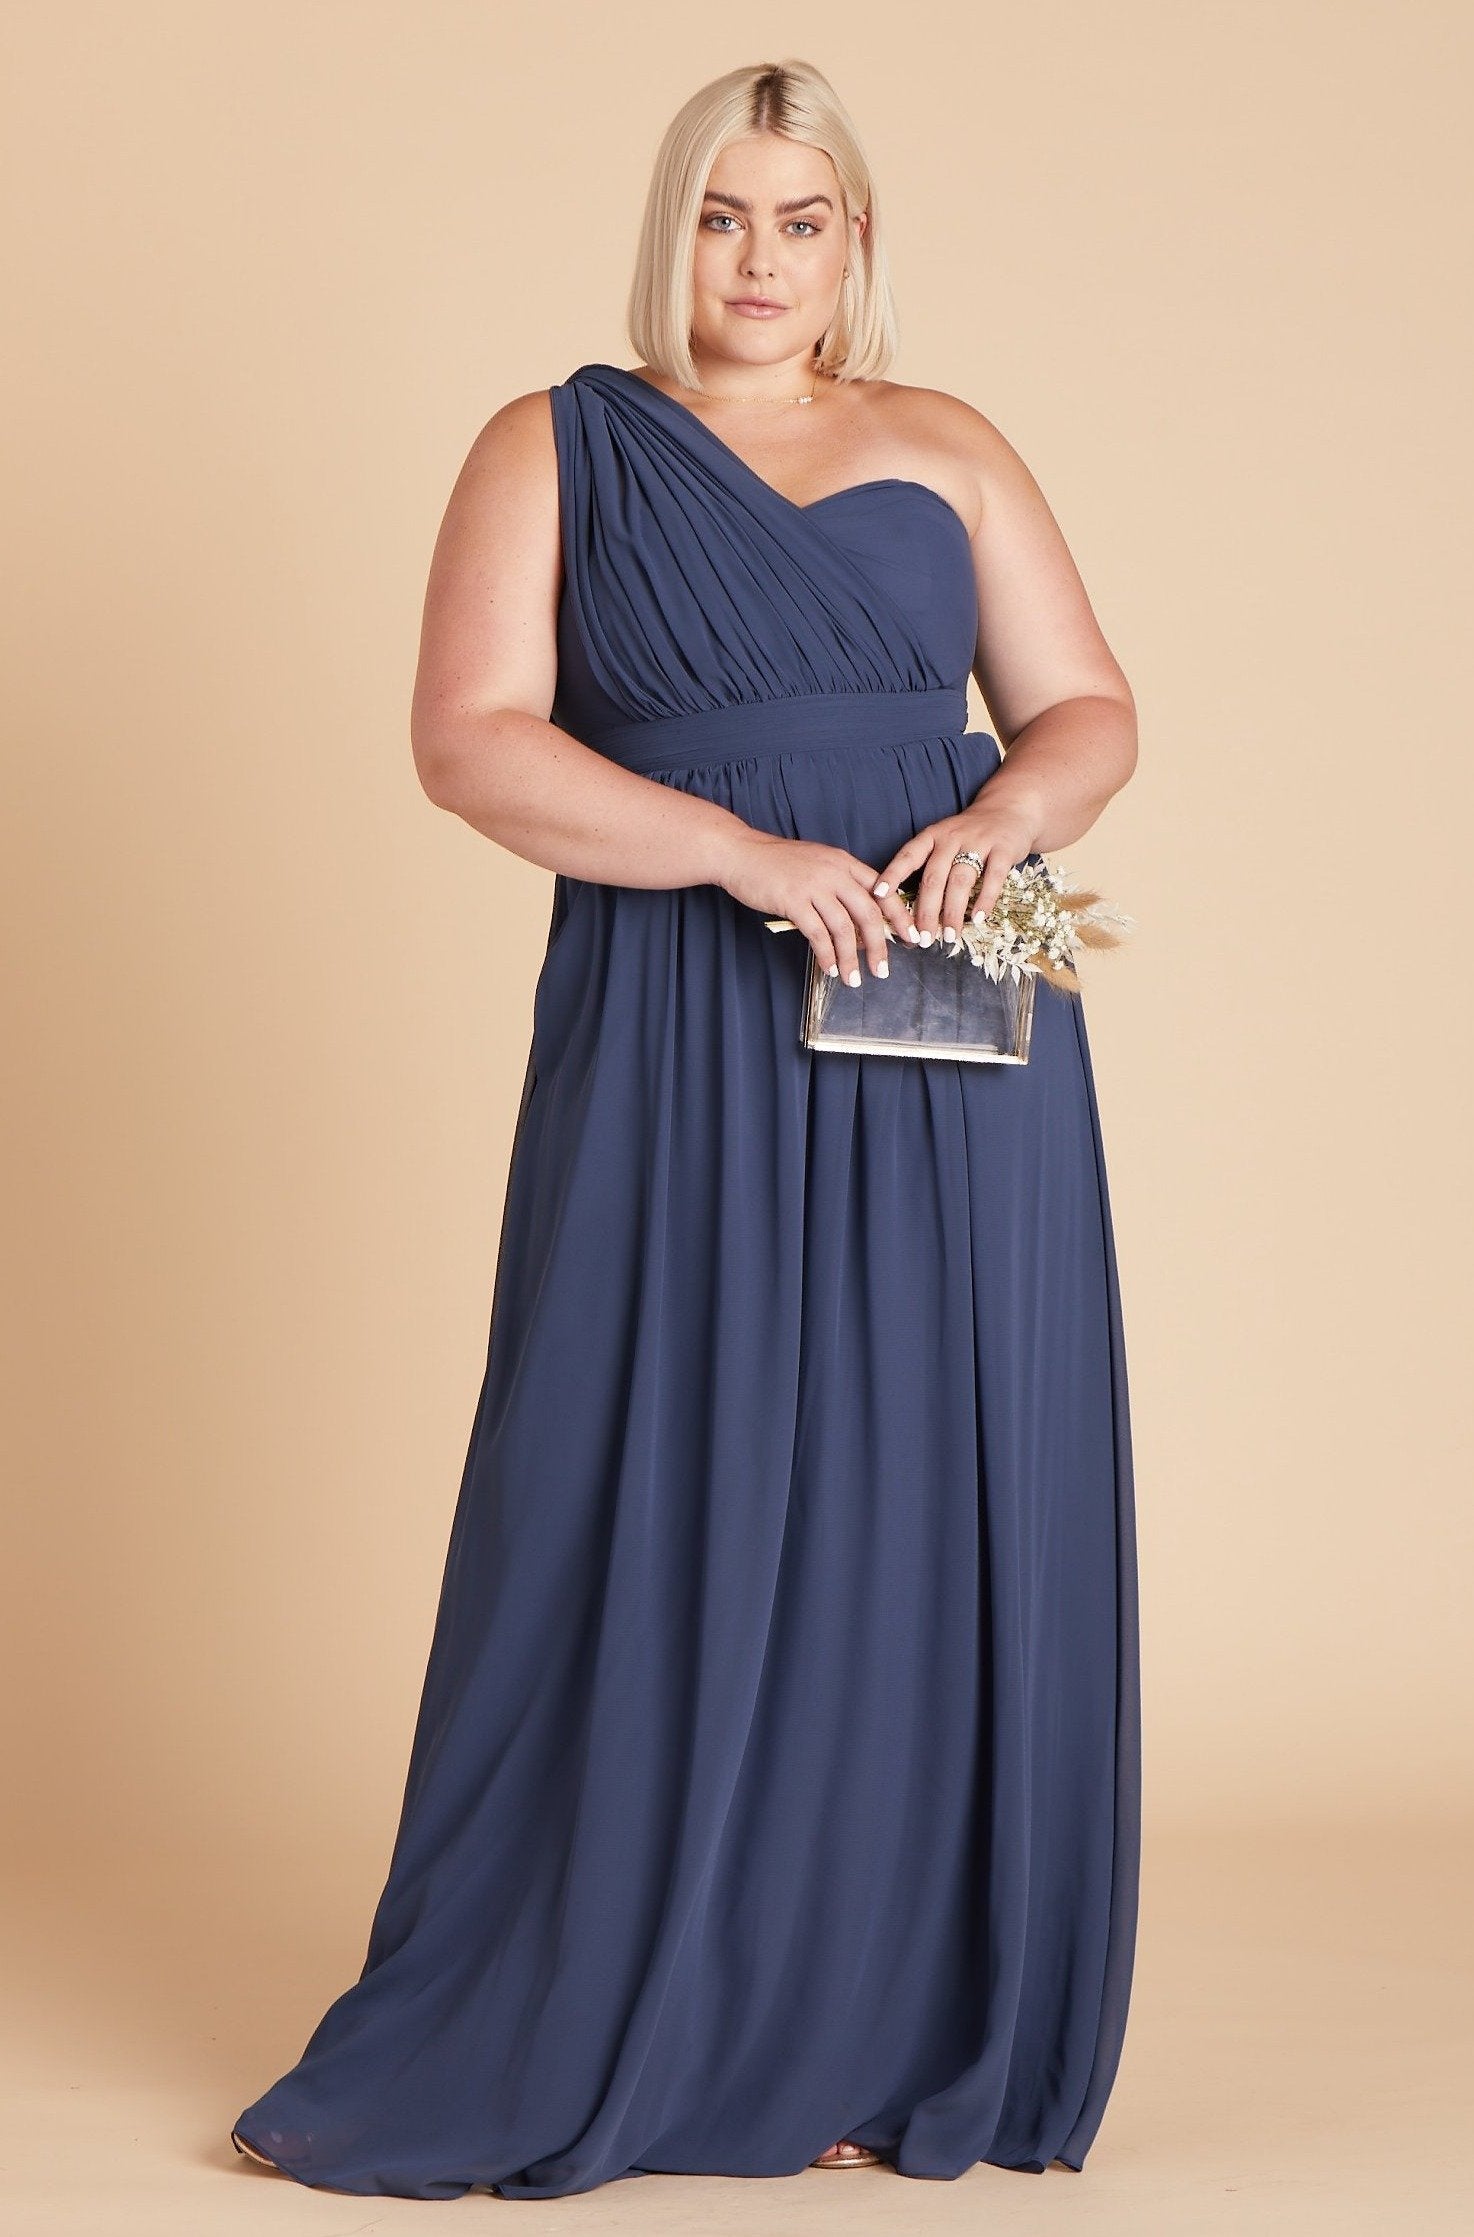 Grace convertible plus size bridesmaid dress in slate blue chiffon by Birdy Grey, front view